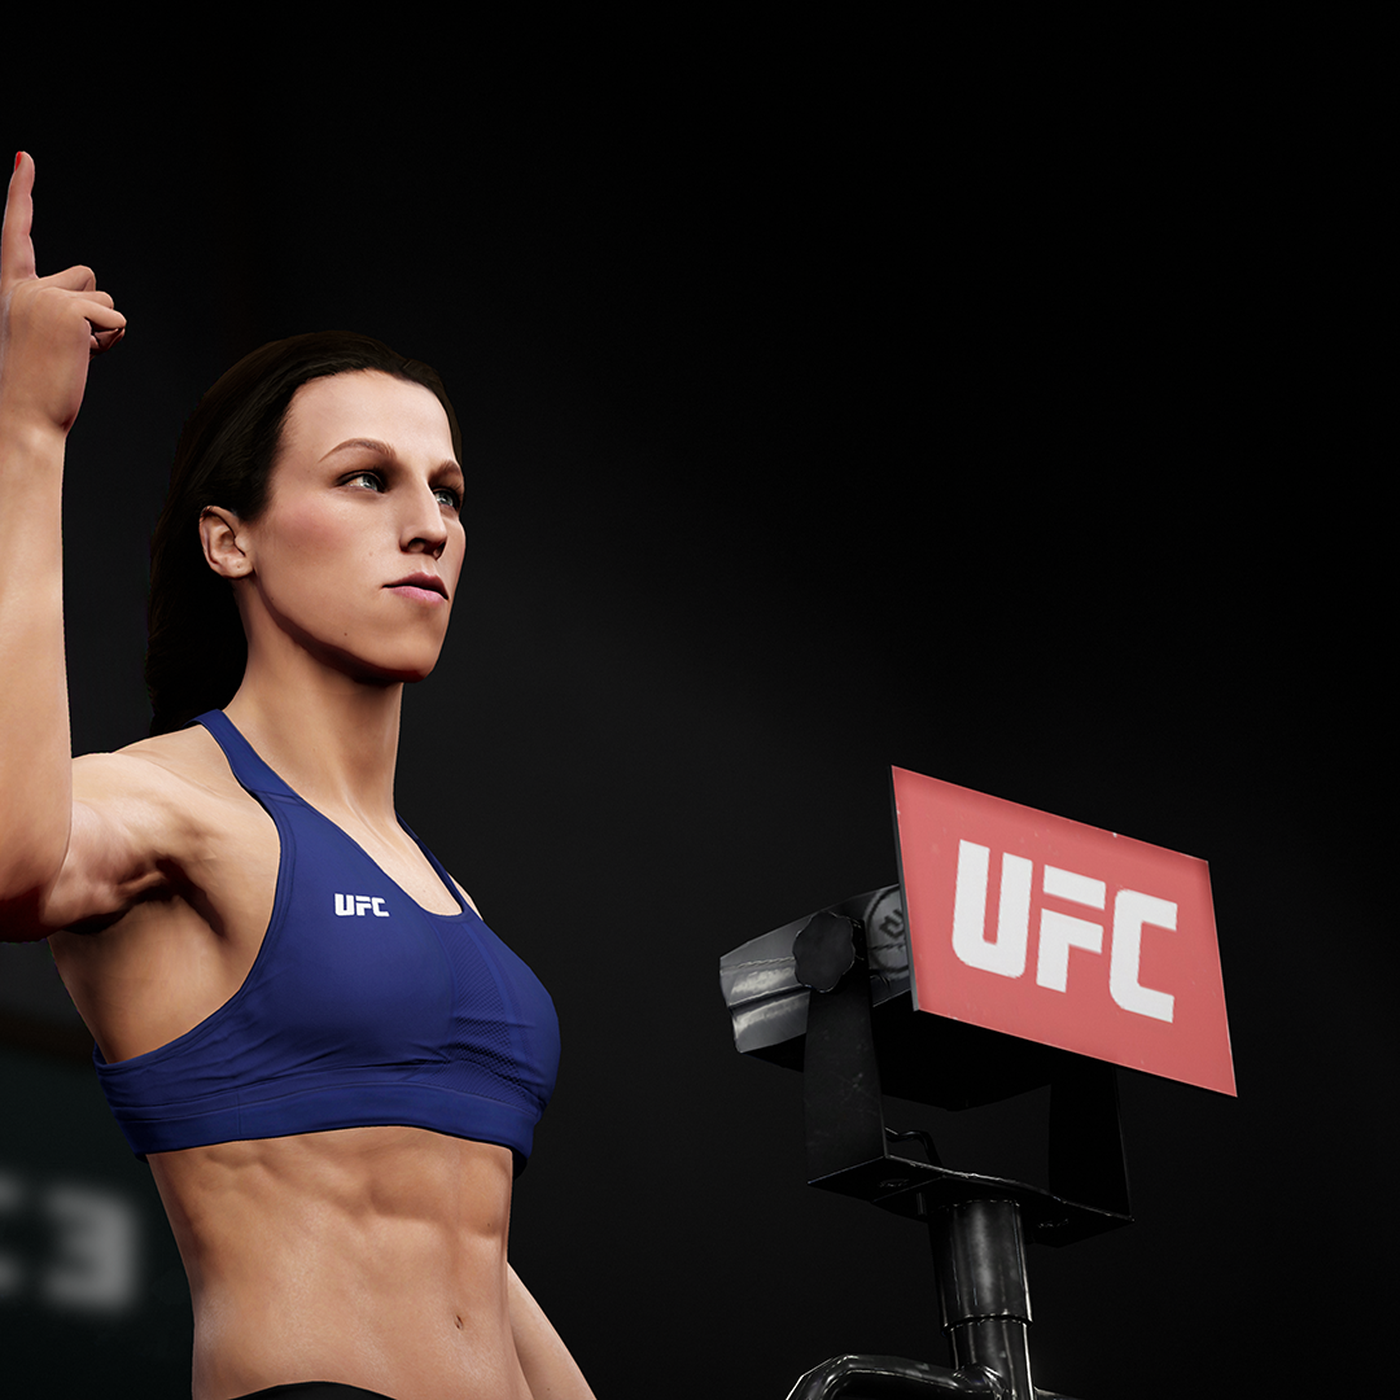 UFC 3 spices up career mode, experience - MMA Fighting